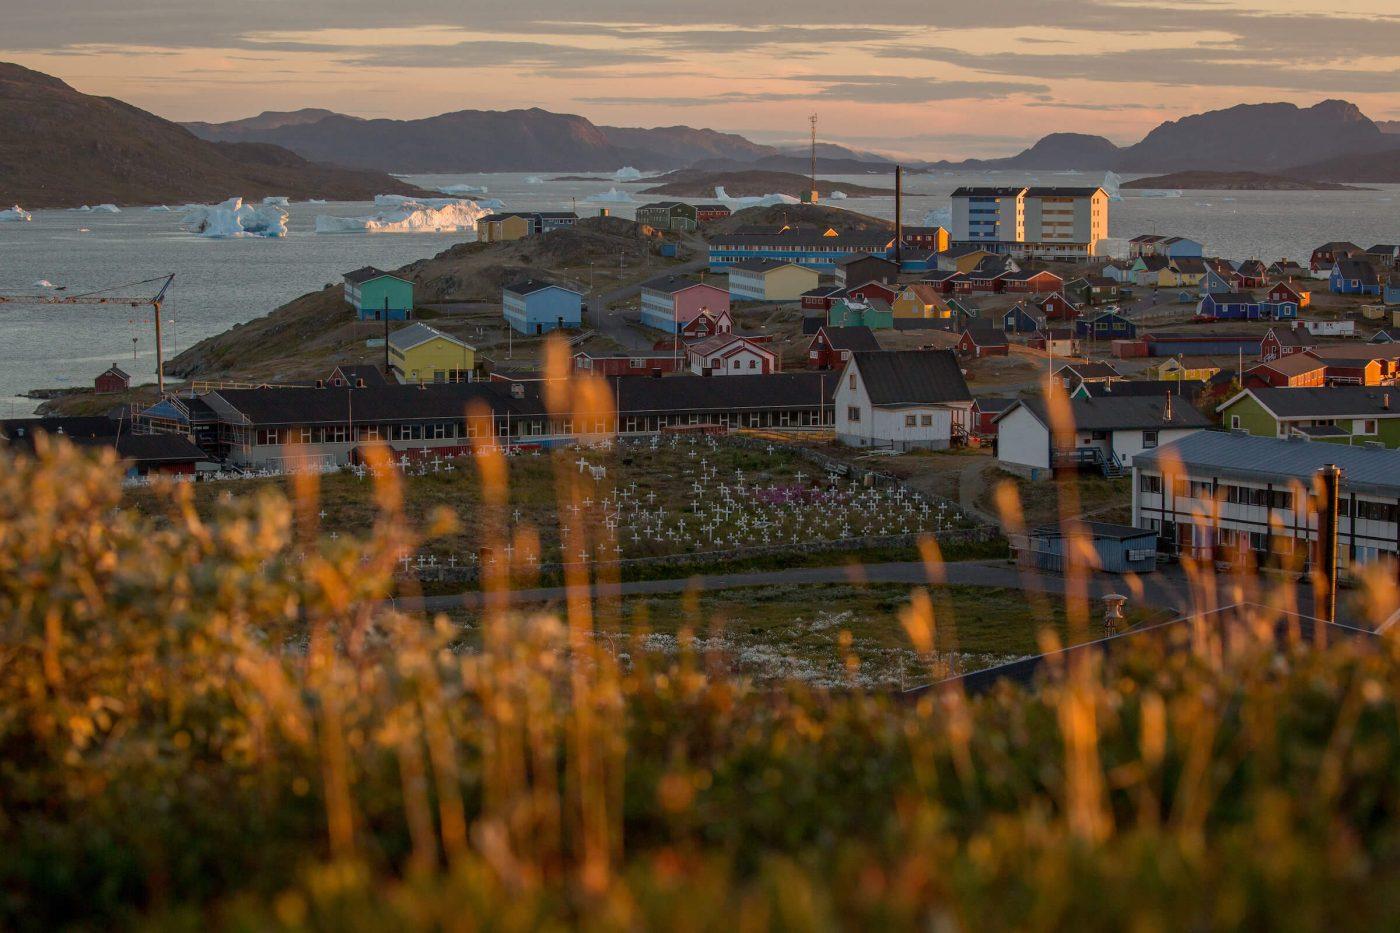 Sunset over Narsaq and the bay with icebergs in South Greenland. Photo by Mads Pihl.